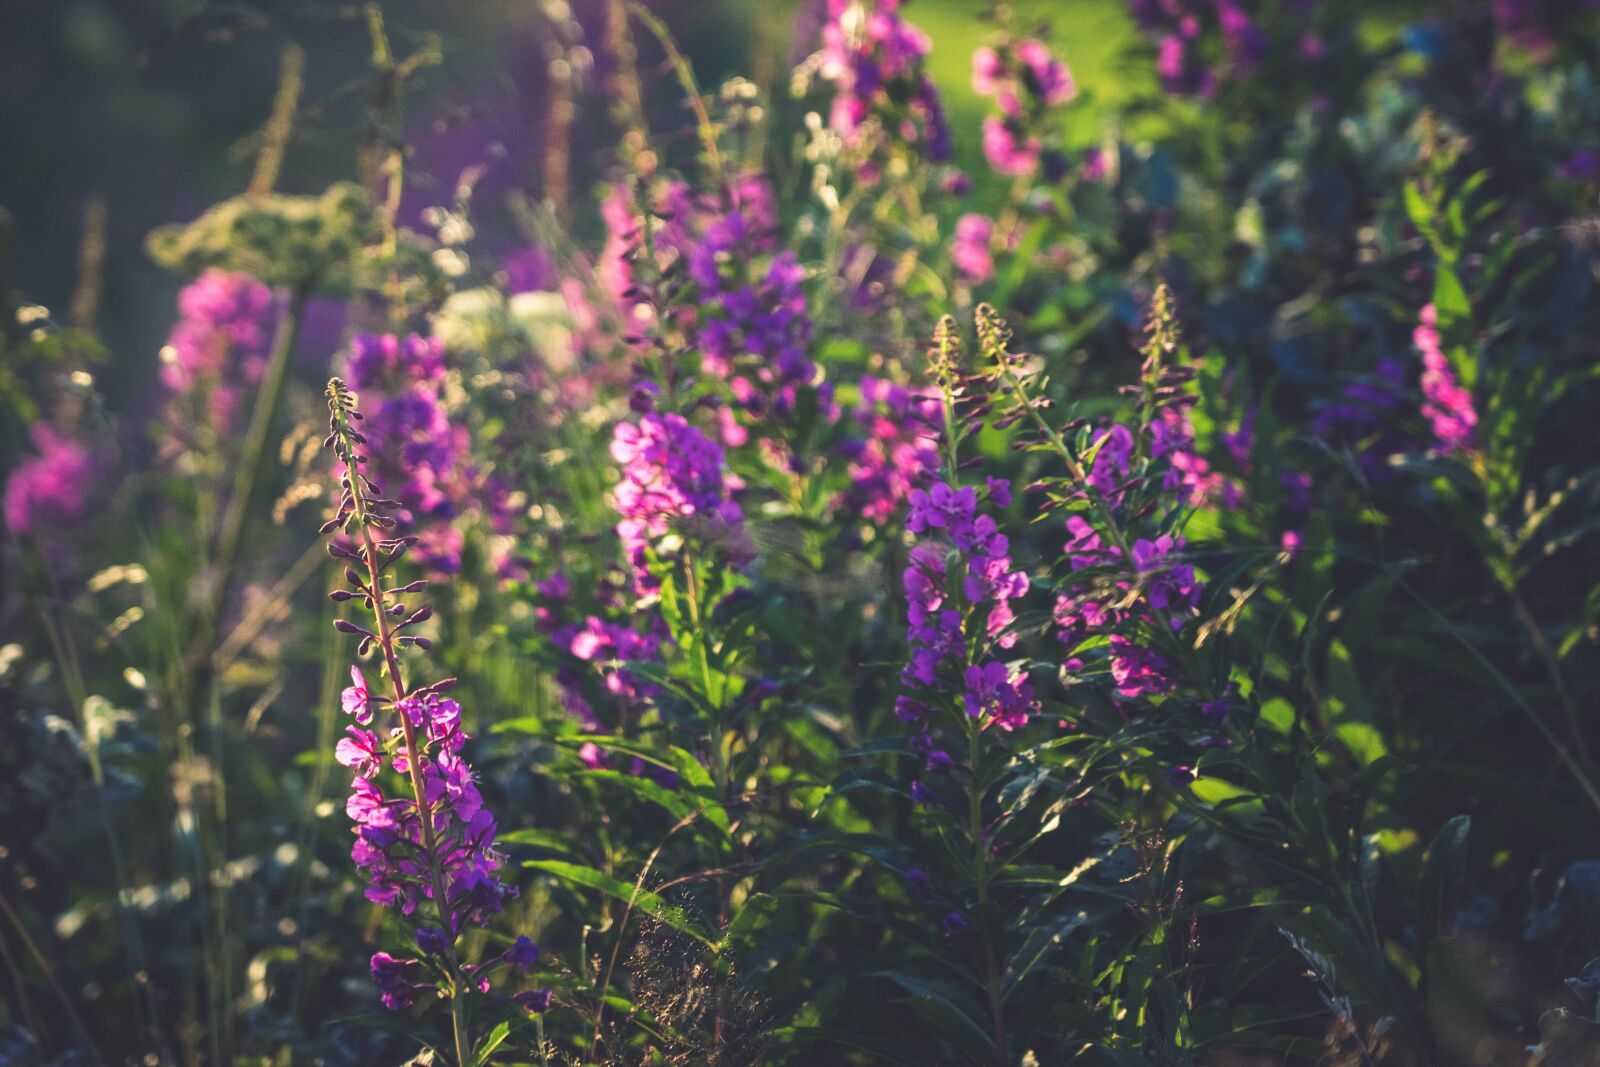 Sony a7 II sample photo. Landscape, flowers, nature photography